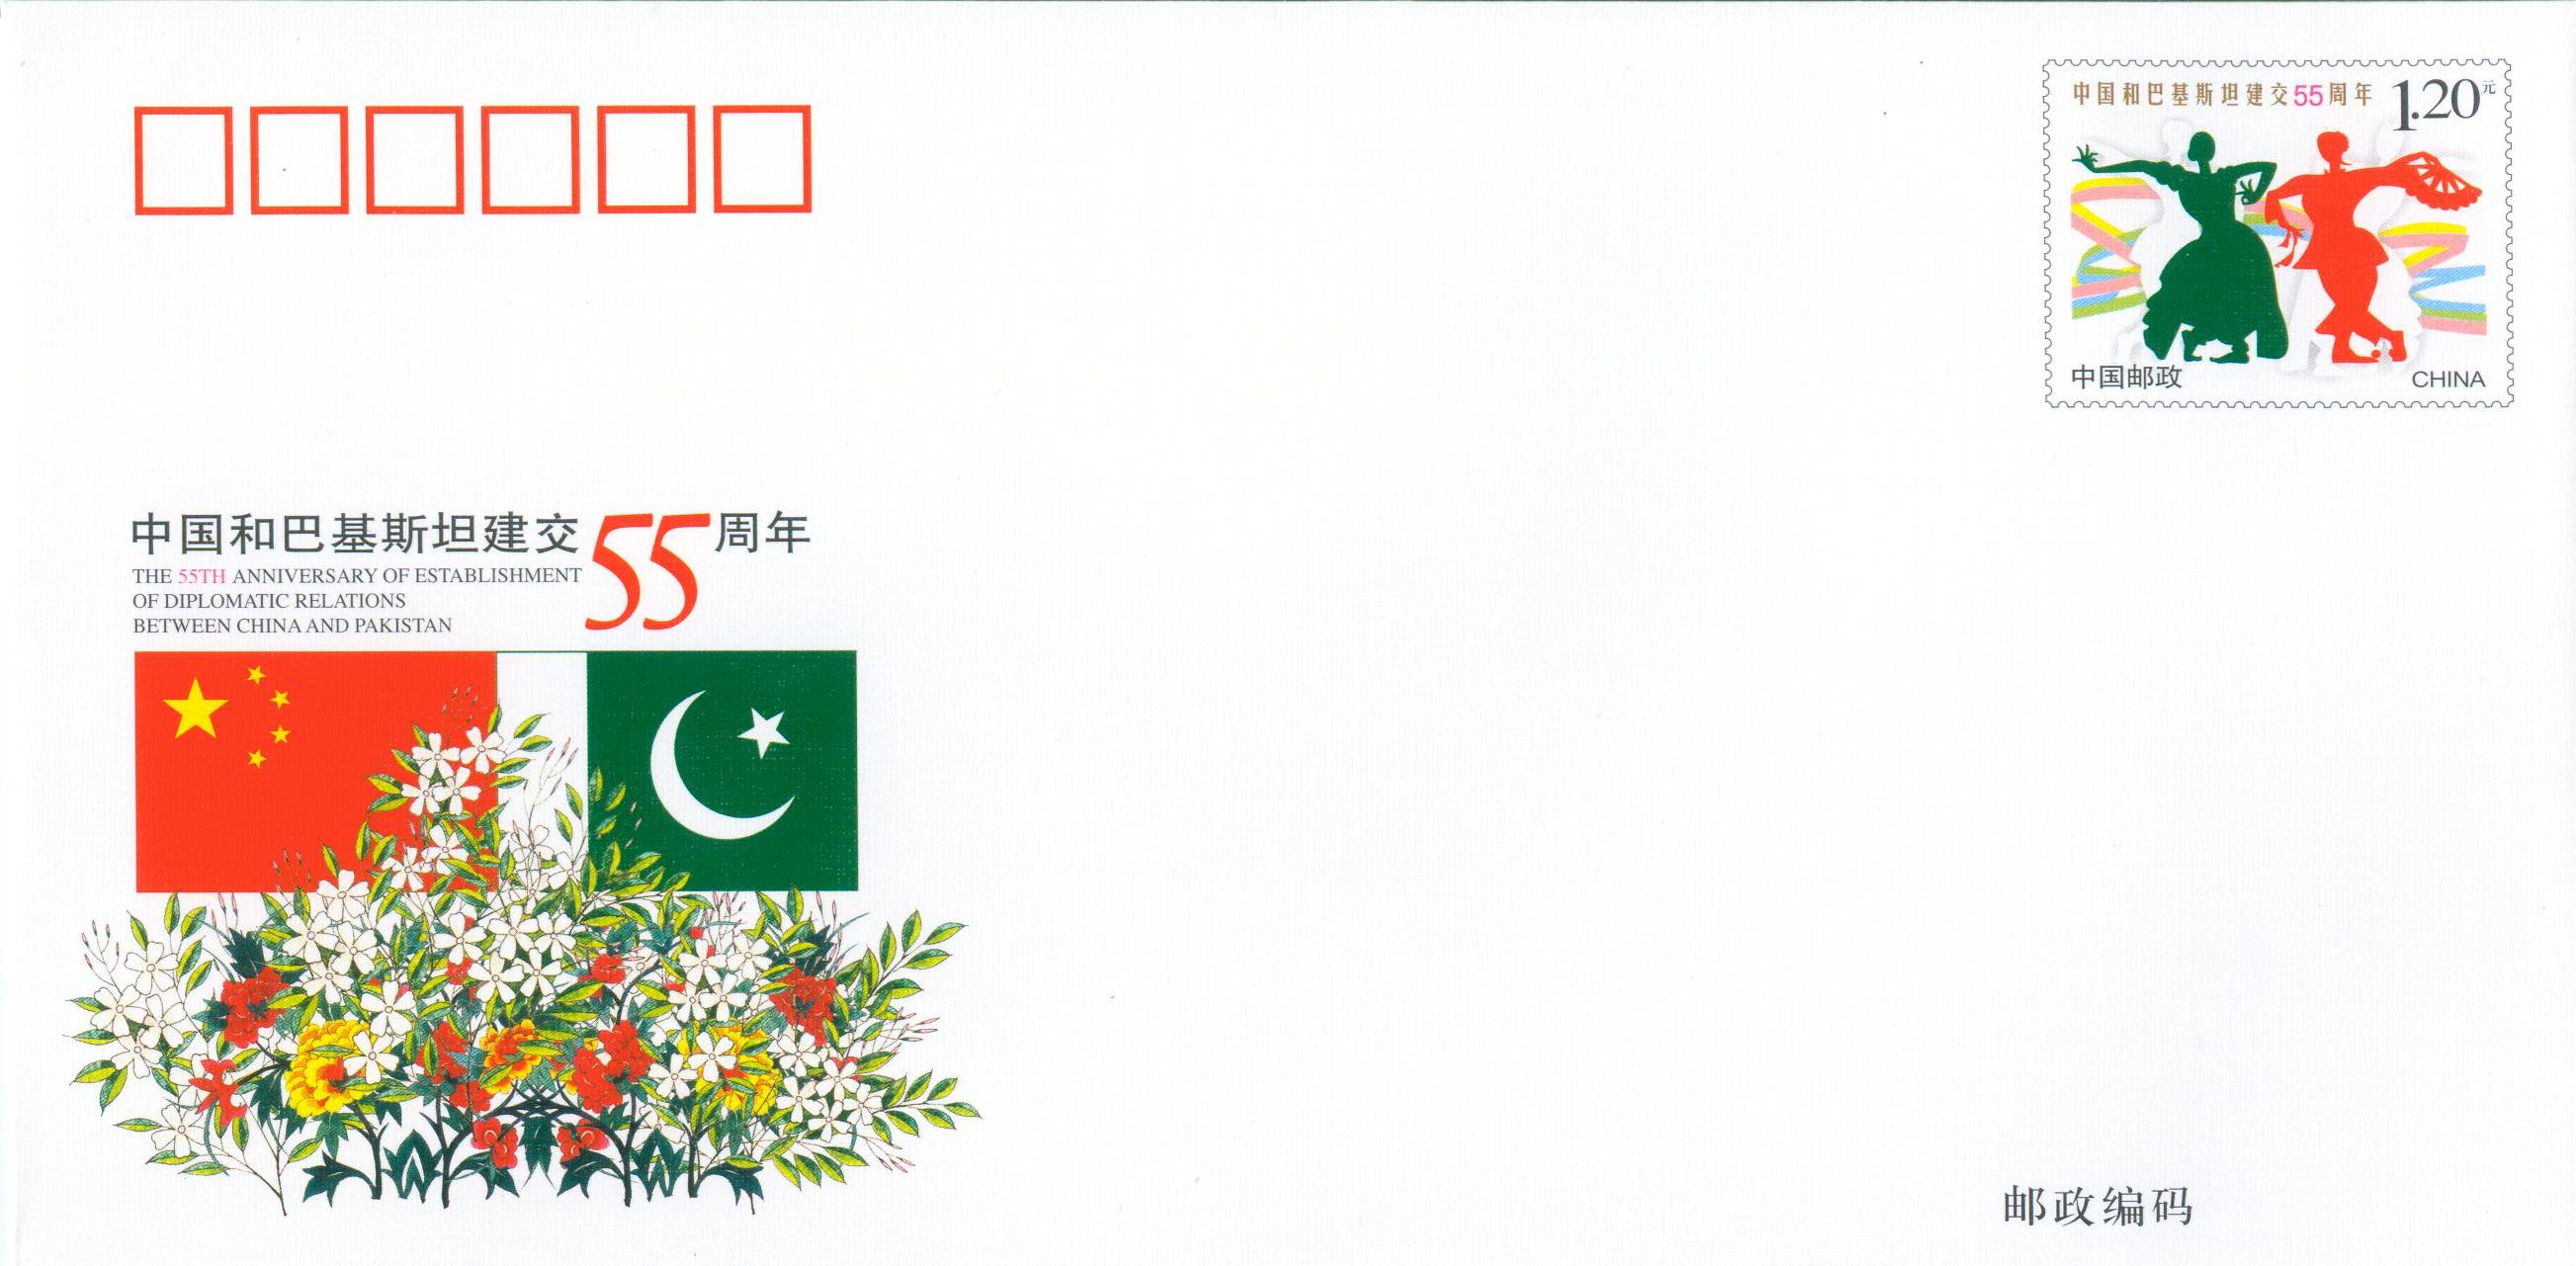 JF84 The 55th Anniversary of Establishment of Diplomatic Relations Betweens China and Pakistan 2006